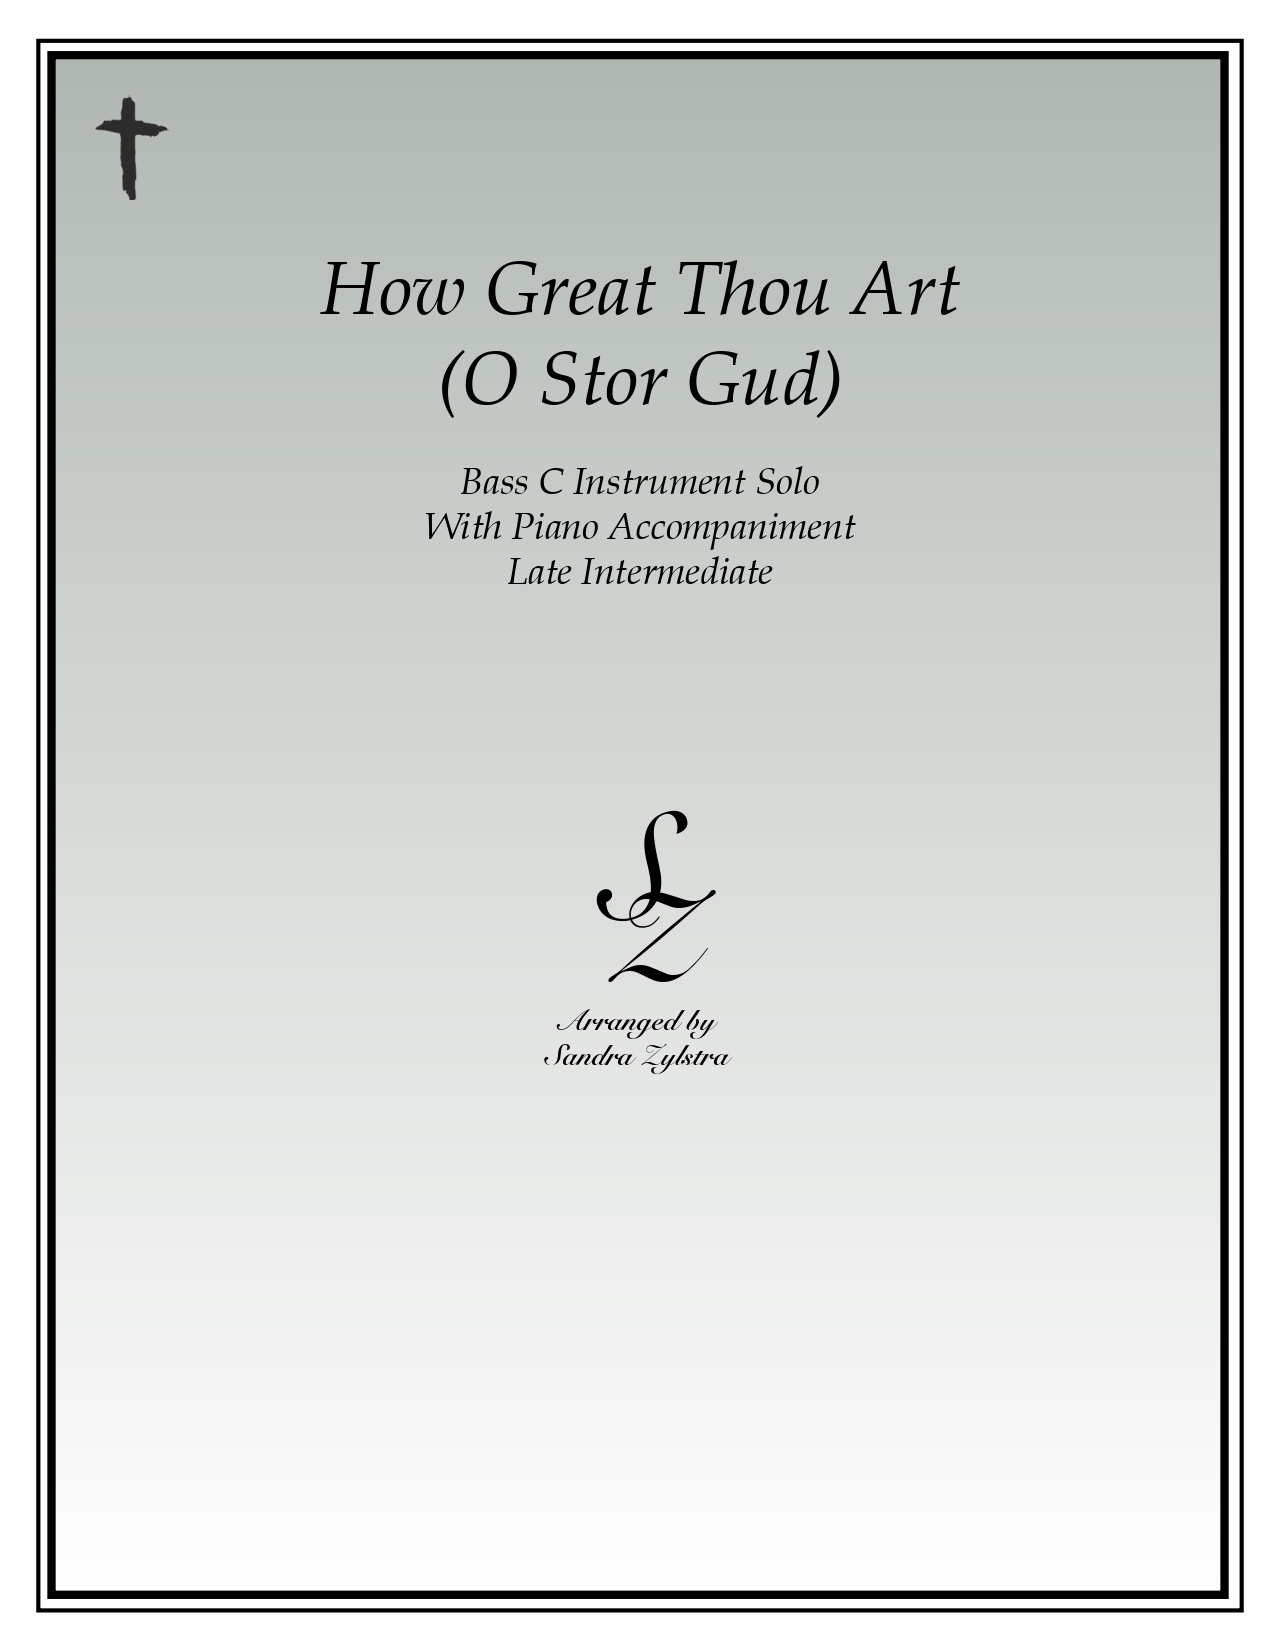 How Great Thou Art bass C instrument solo part cover page 00011